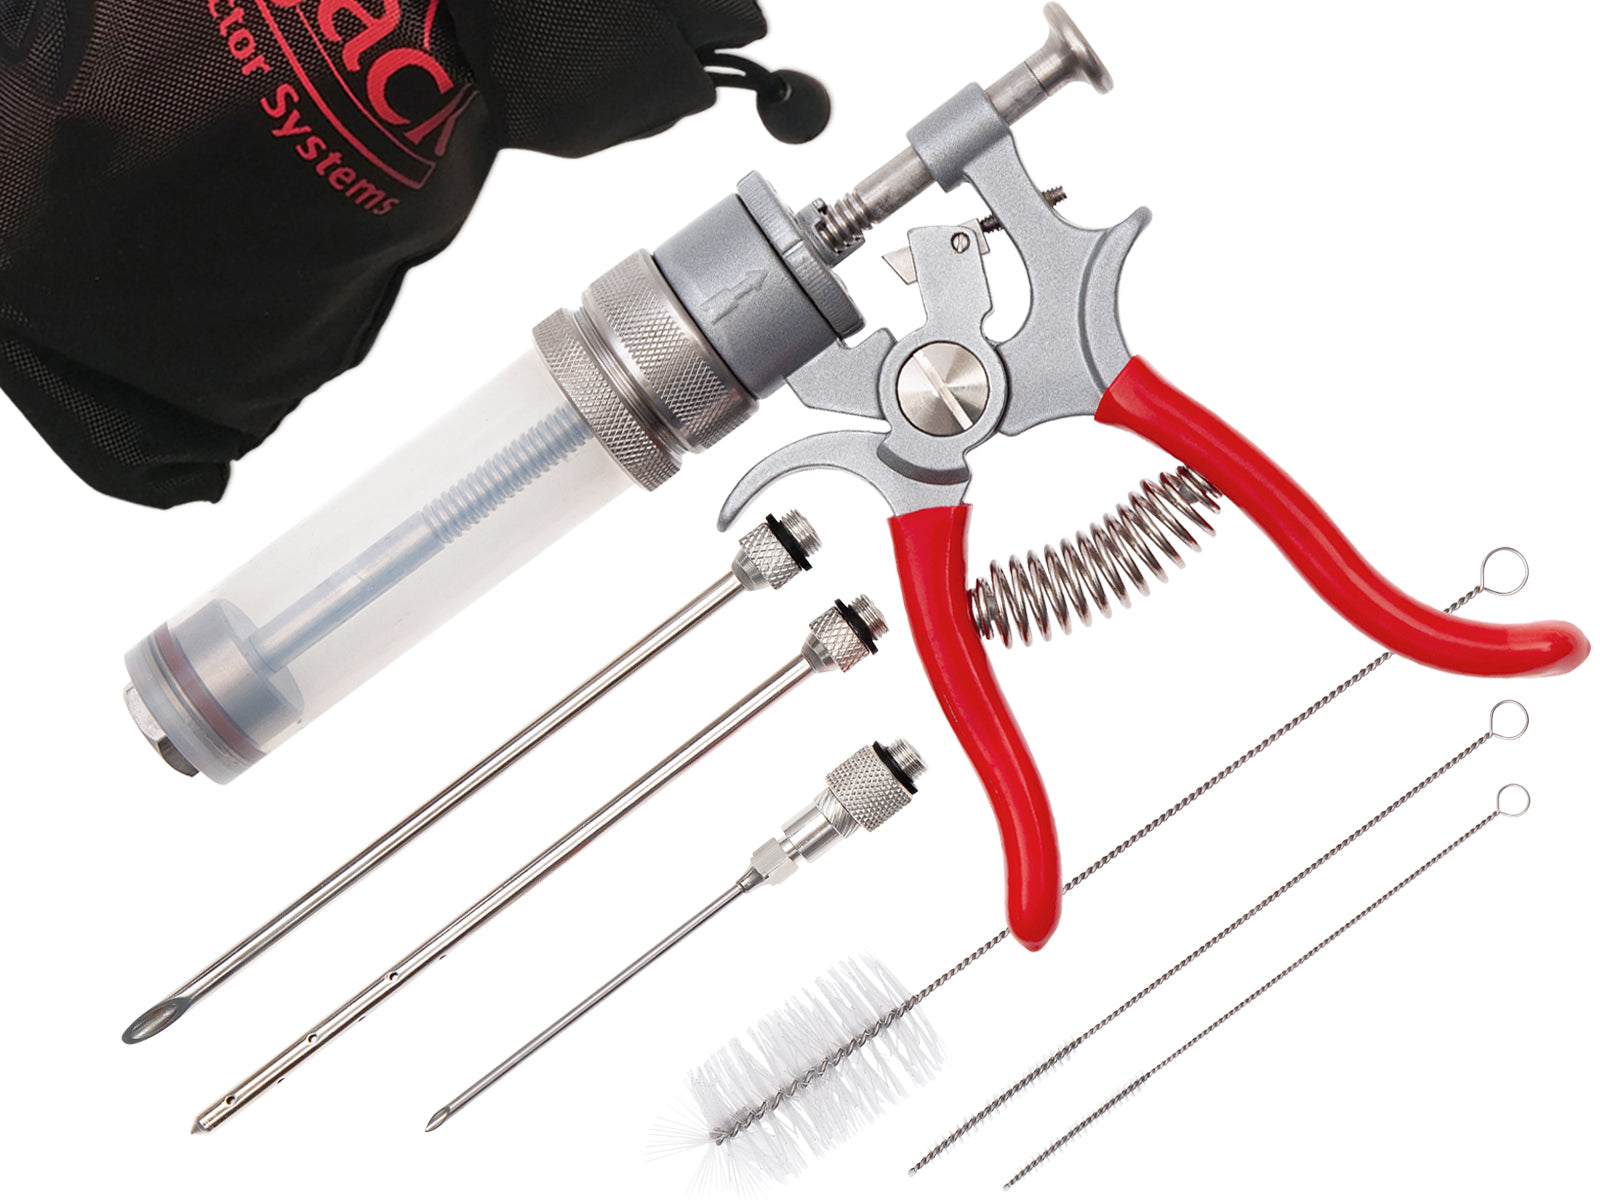 Meat Injector - Marinade Injector Syringe Kit with 3 Needles & 4